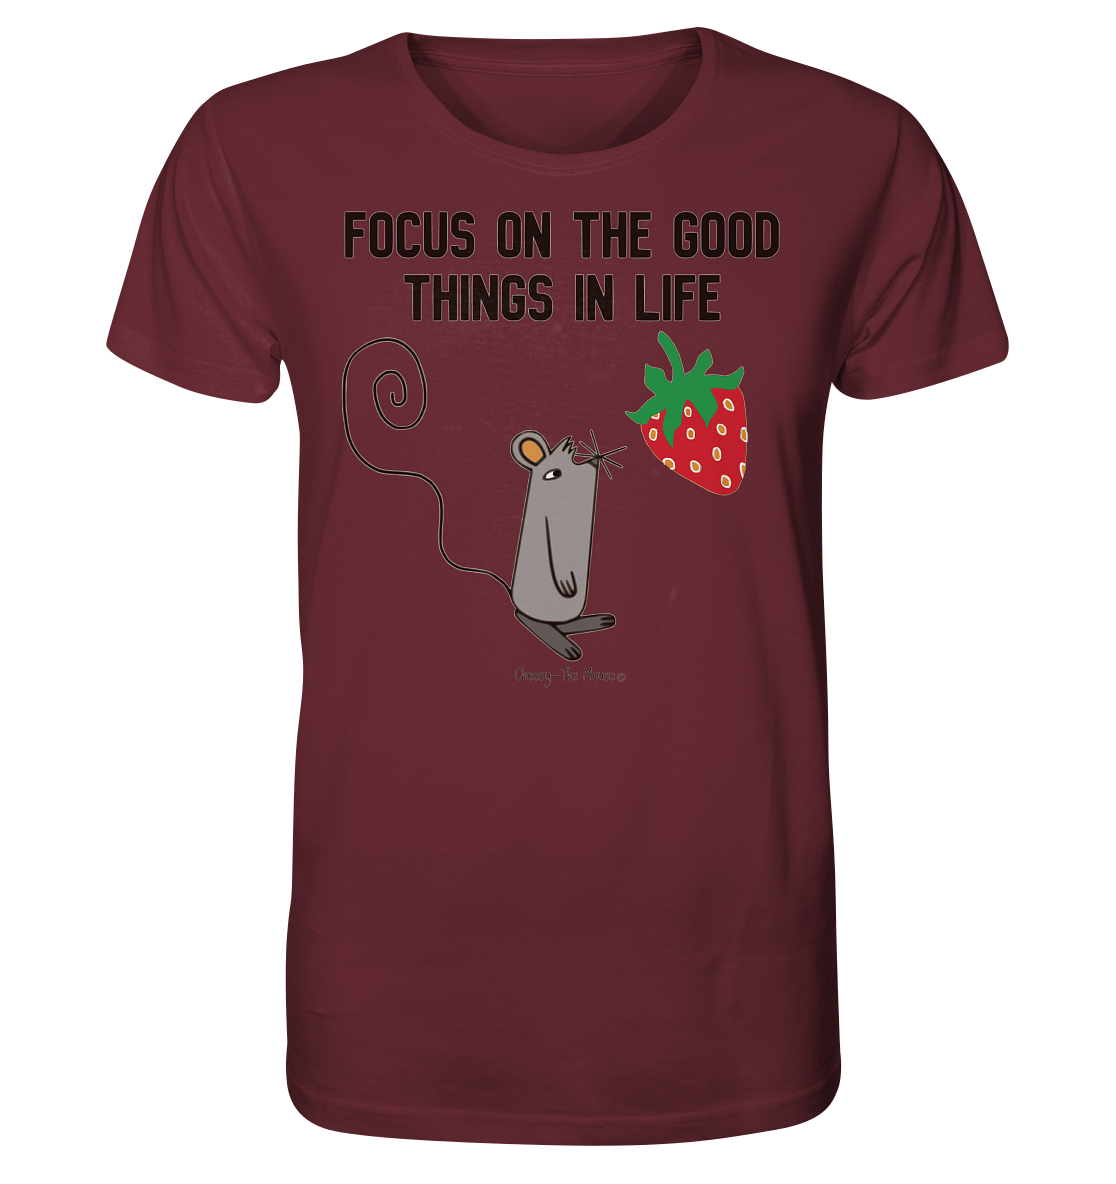 Cheesy -The Mouse® Focus on good things in life - Organic Shirt